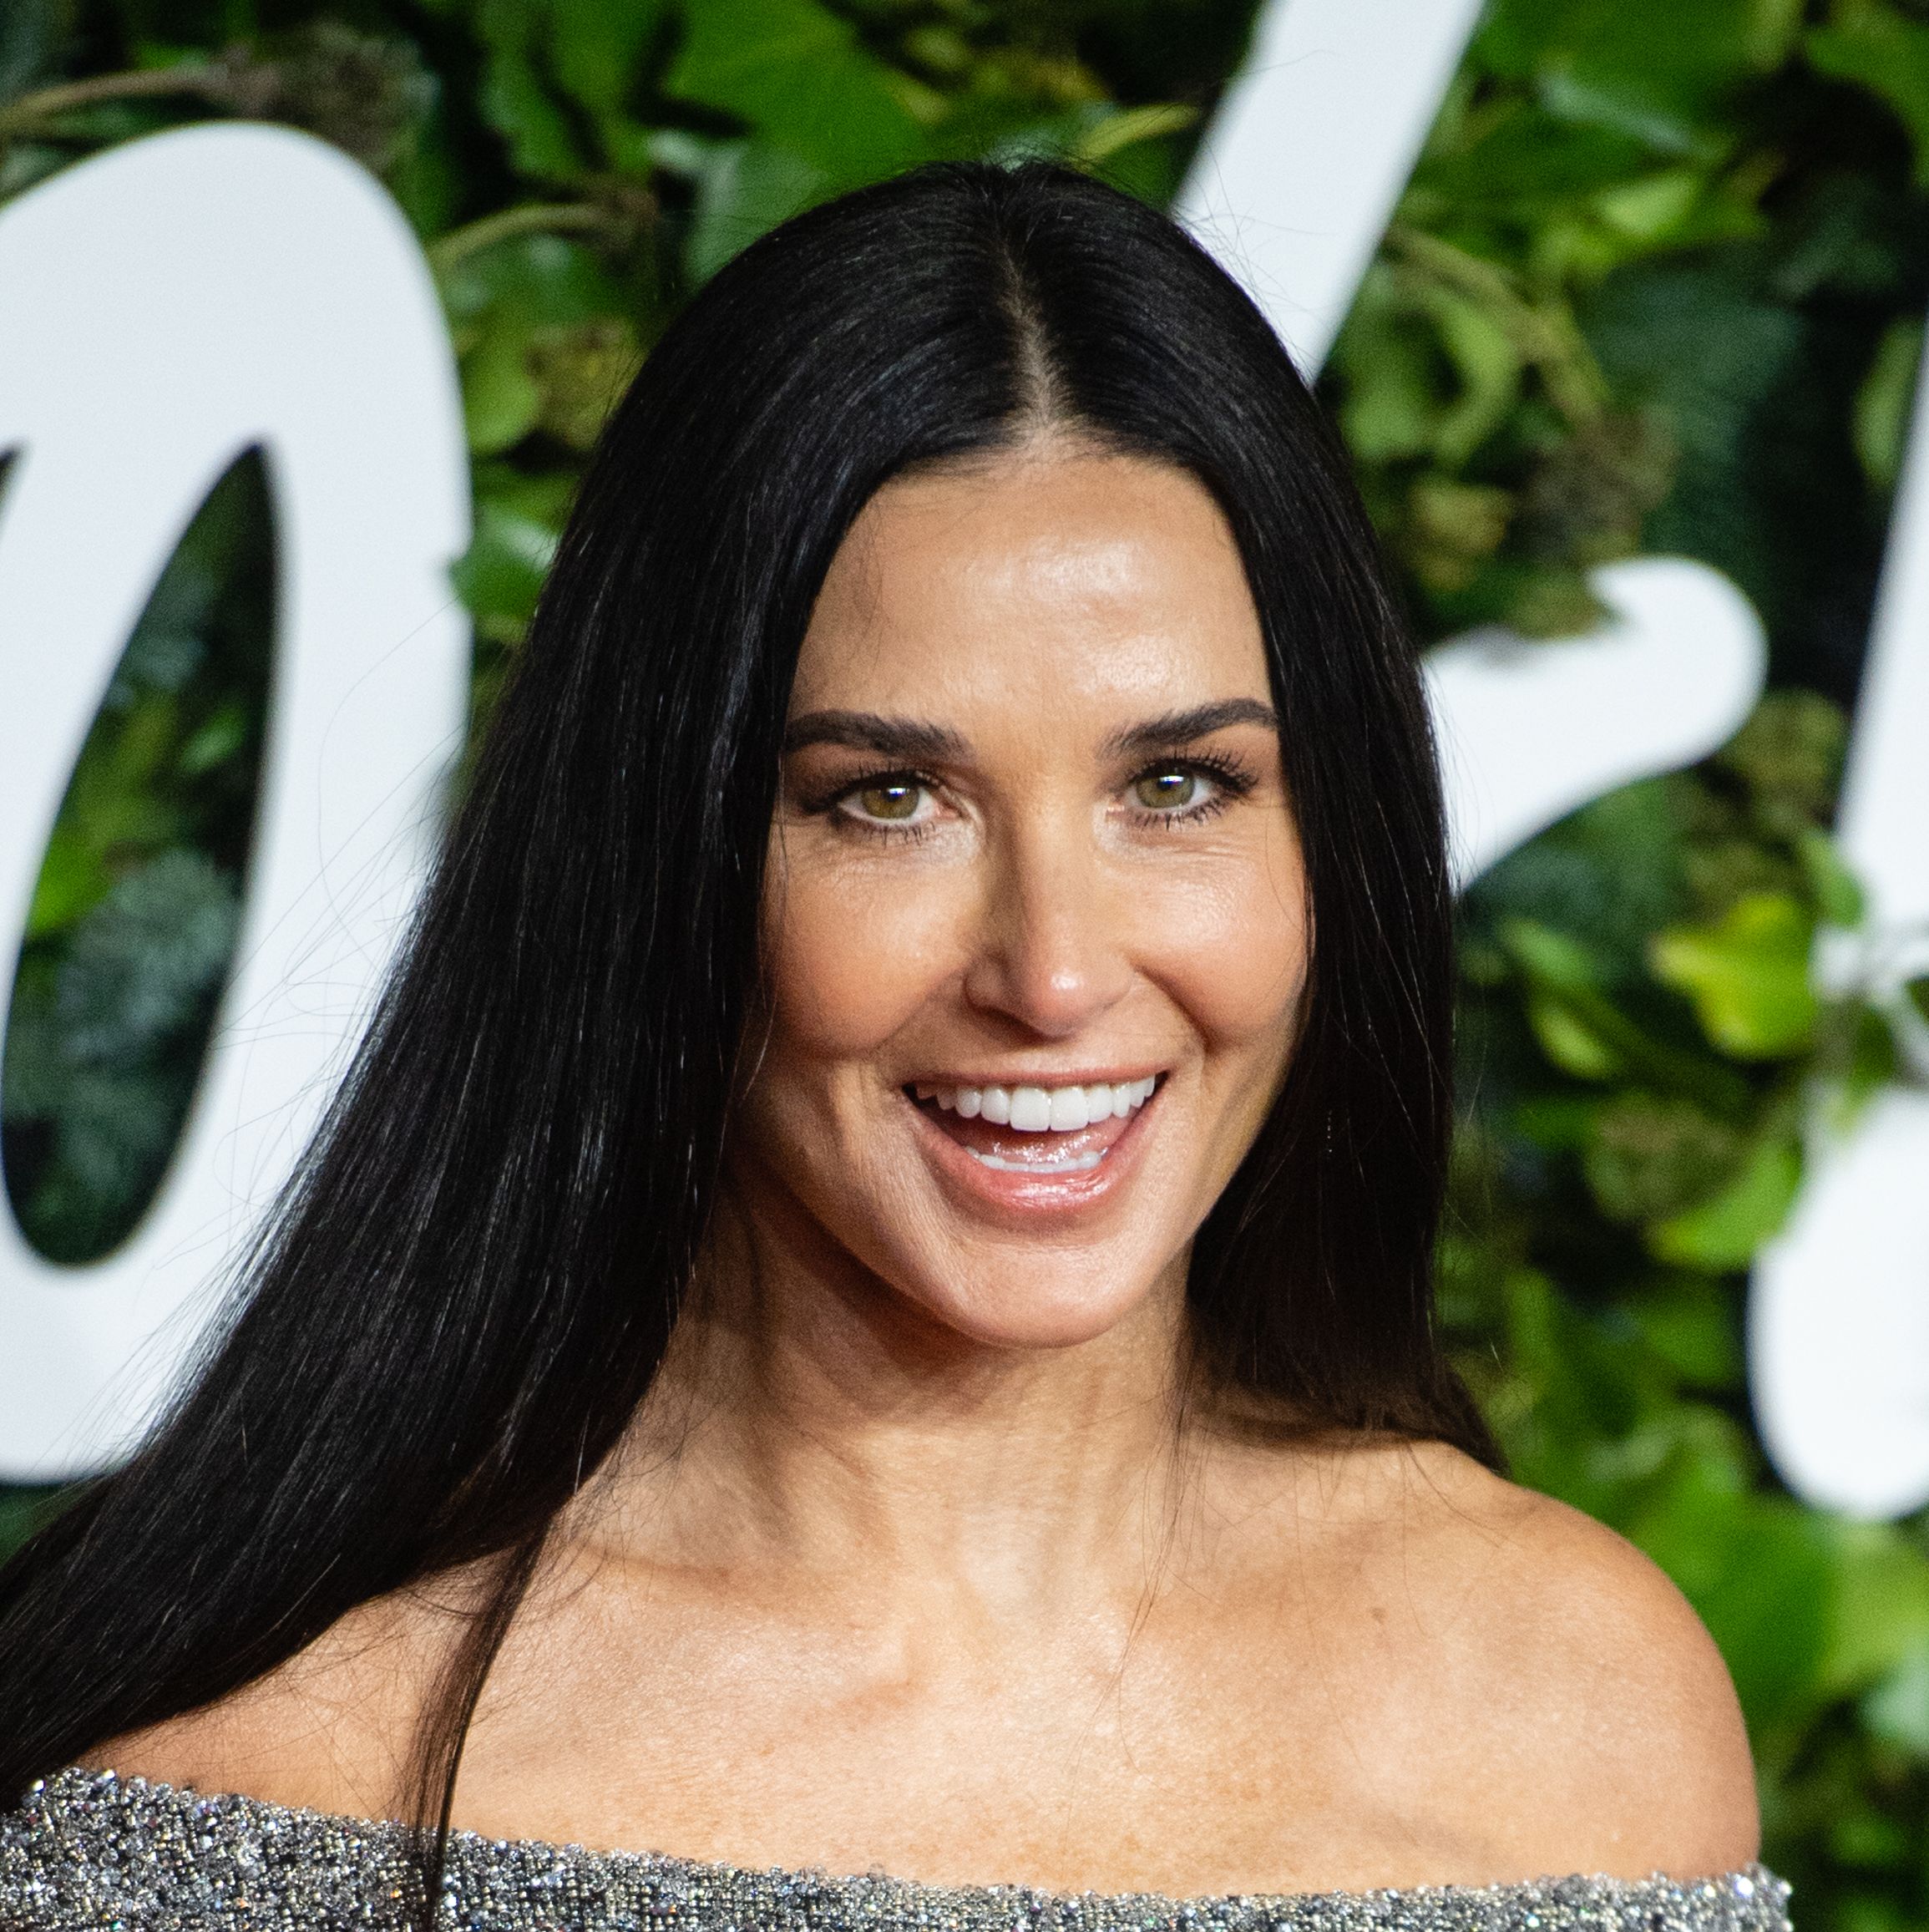 Demi Moore Says She's Excited to Turn 60: 'Feels Very Liberating'